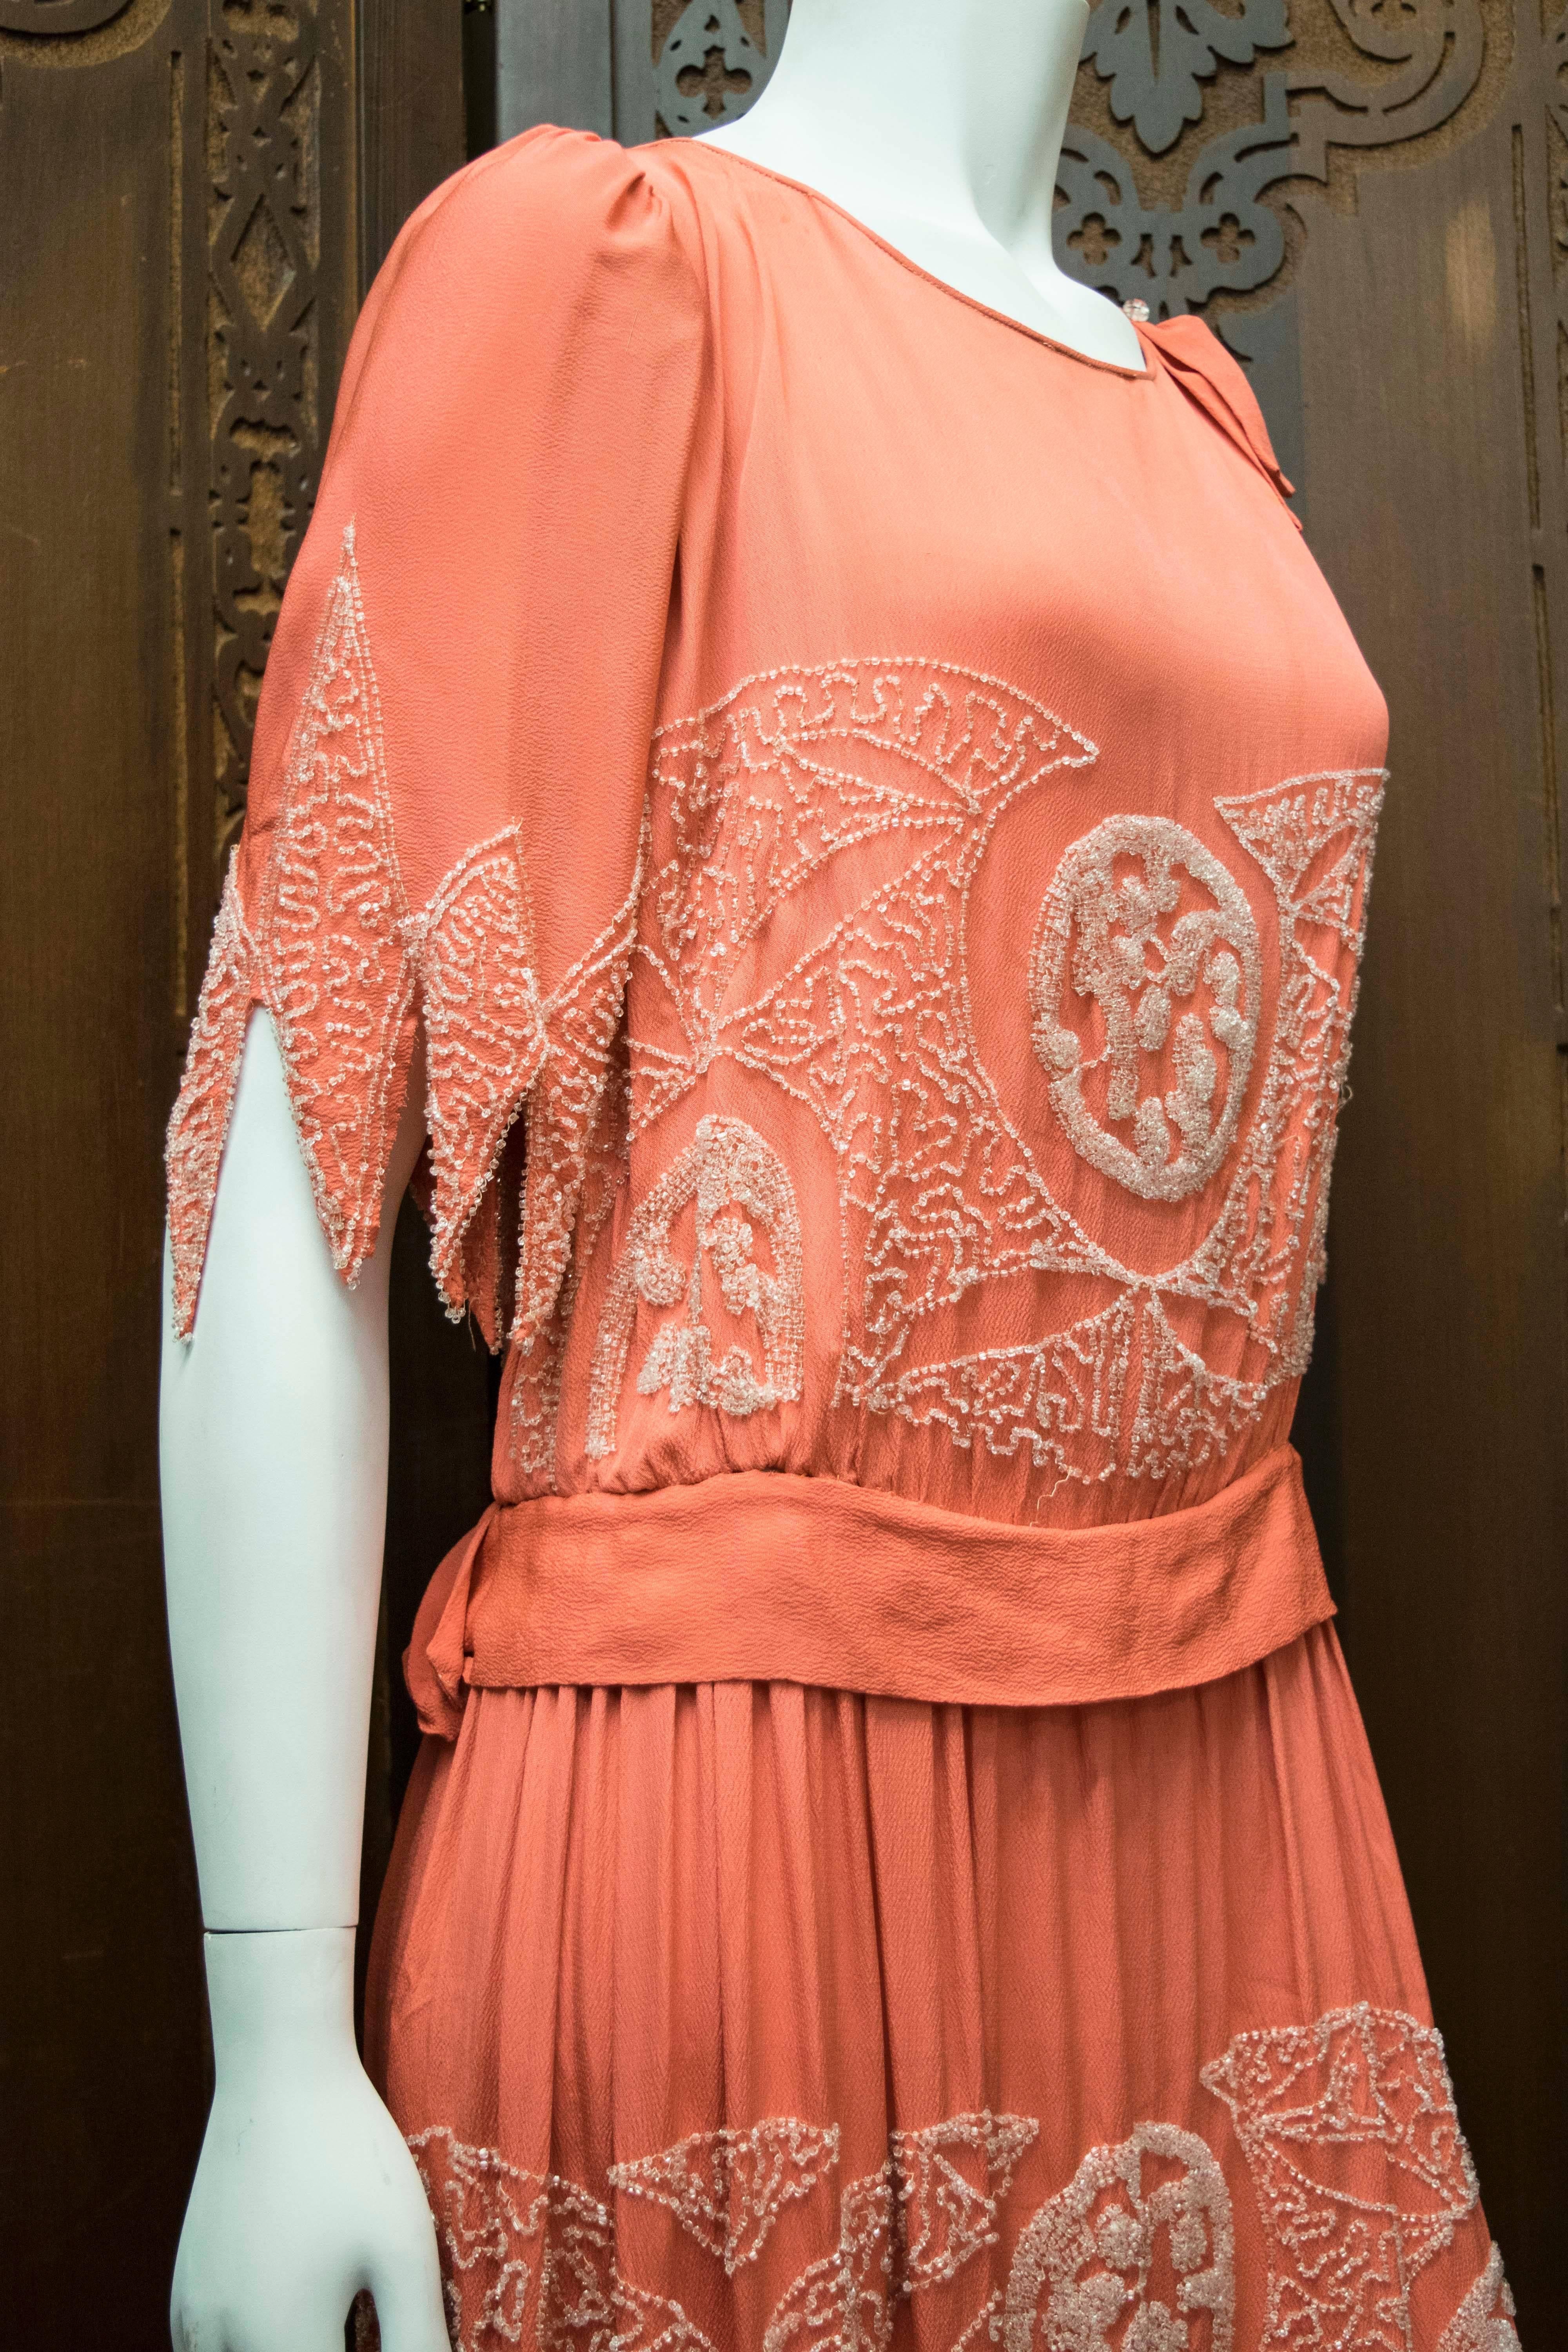 1920s Pink Beaded Flapper Dress.
A Beautiful Salmon pink mid-late 1920s flapper dress. The entire piece has been hand beaded, and the stunning handkerchief sleeves and hem have a gorgeous weight and movement to them as a result. The piece has its